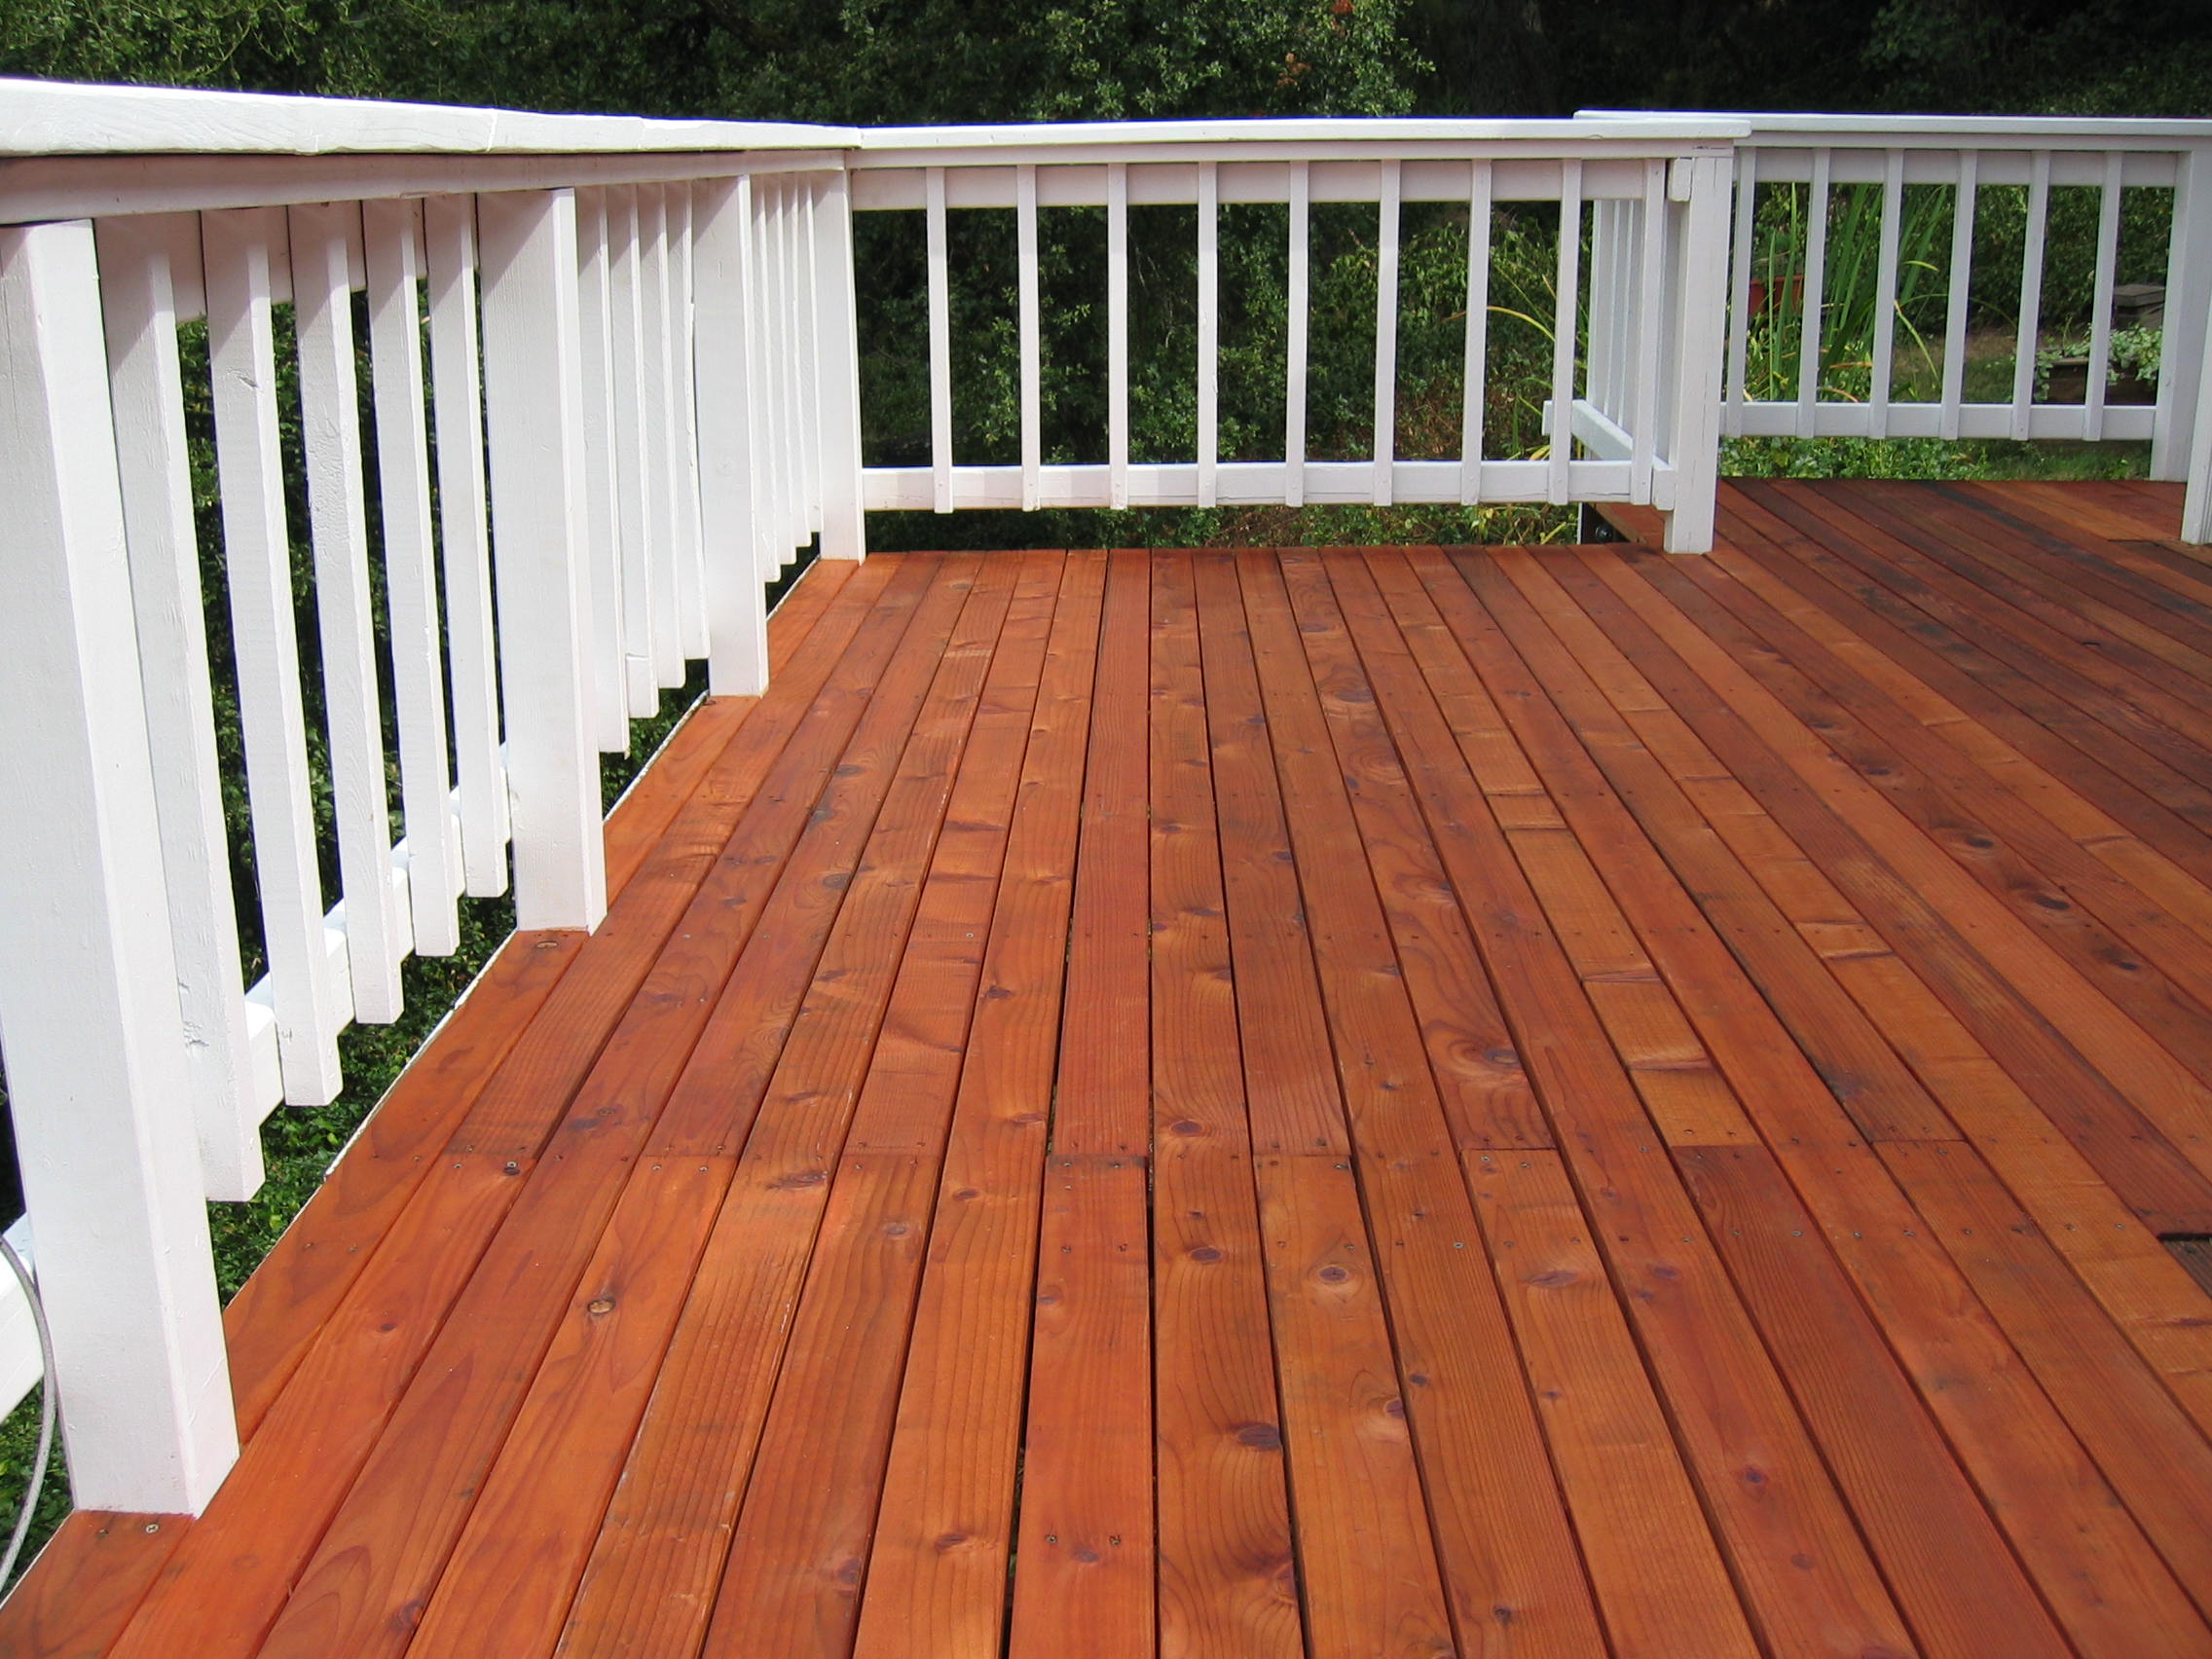 Deck Refinishing Sandedstained Sealed Cjo Maintenance pertaining to proportions 2272 X 1704